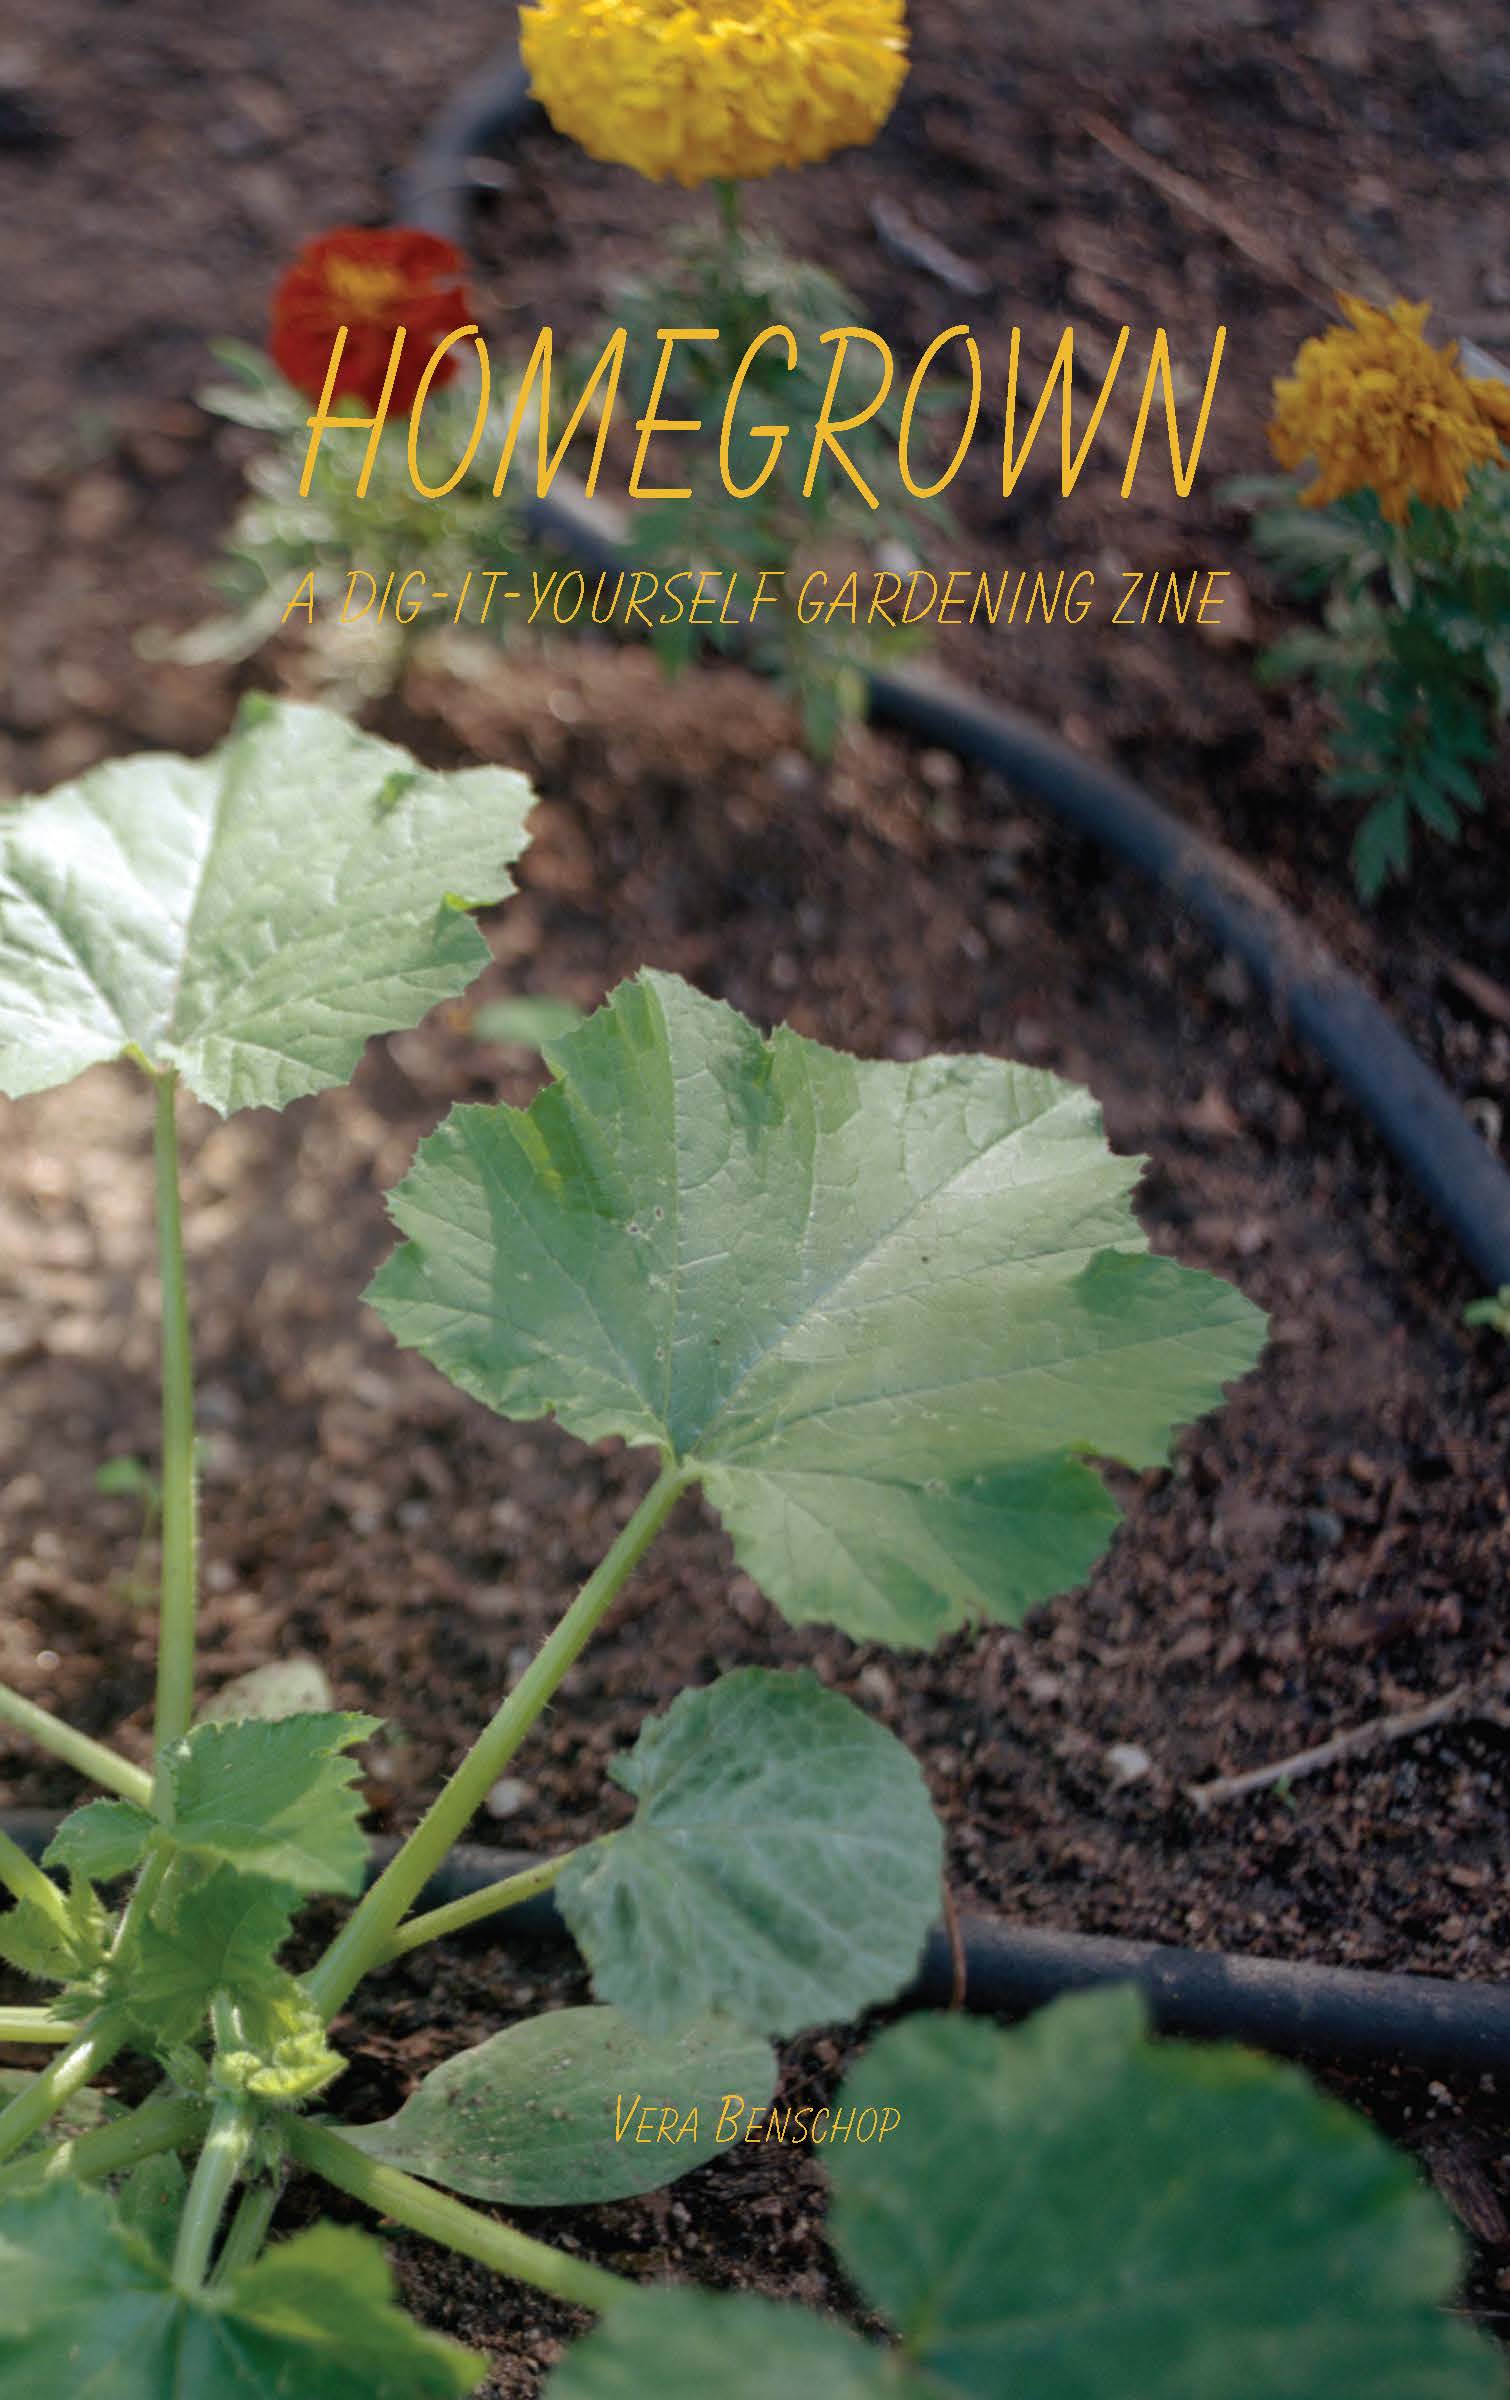 Homegrown: a Dig-it-yourself Zine